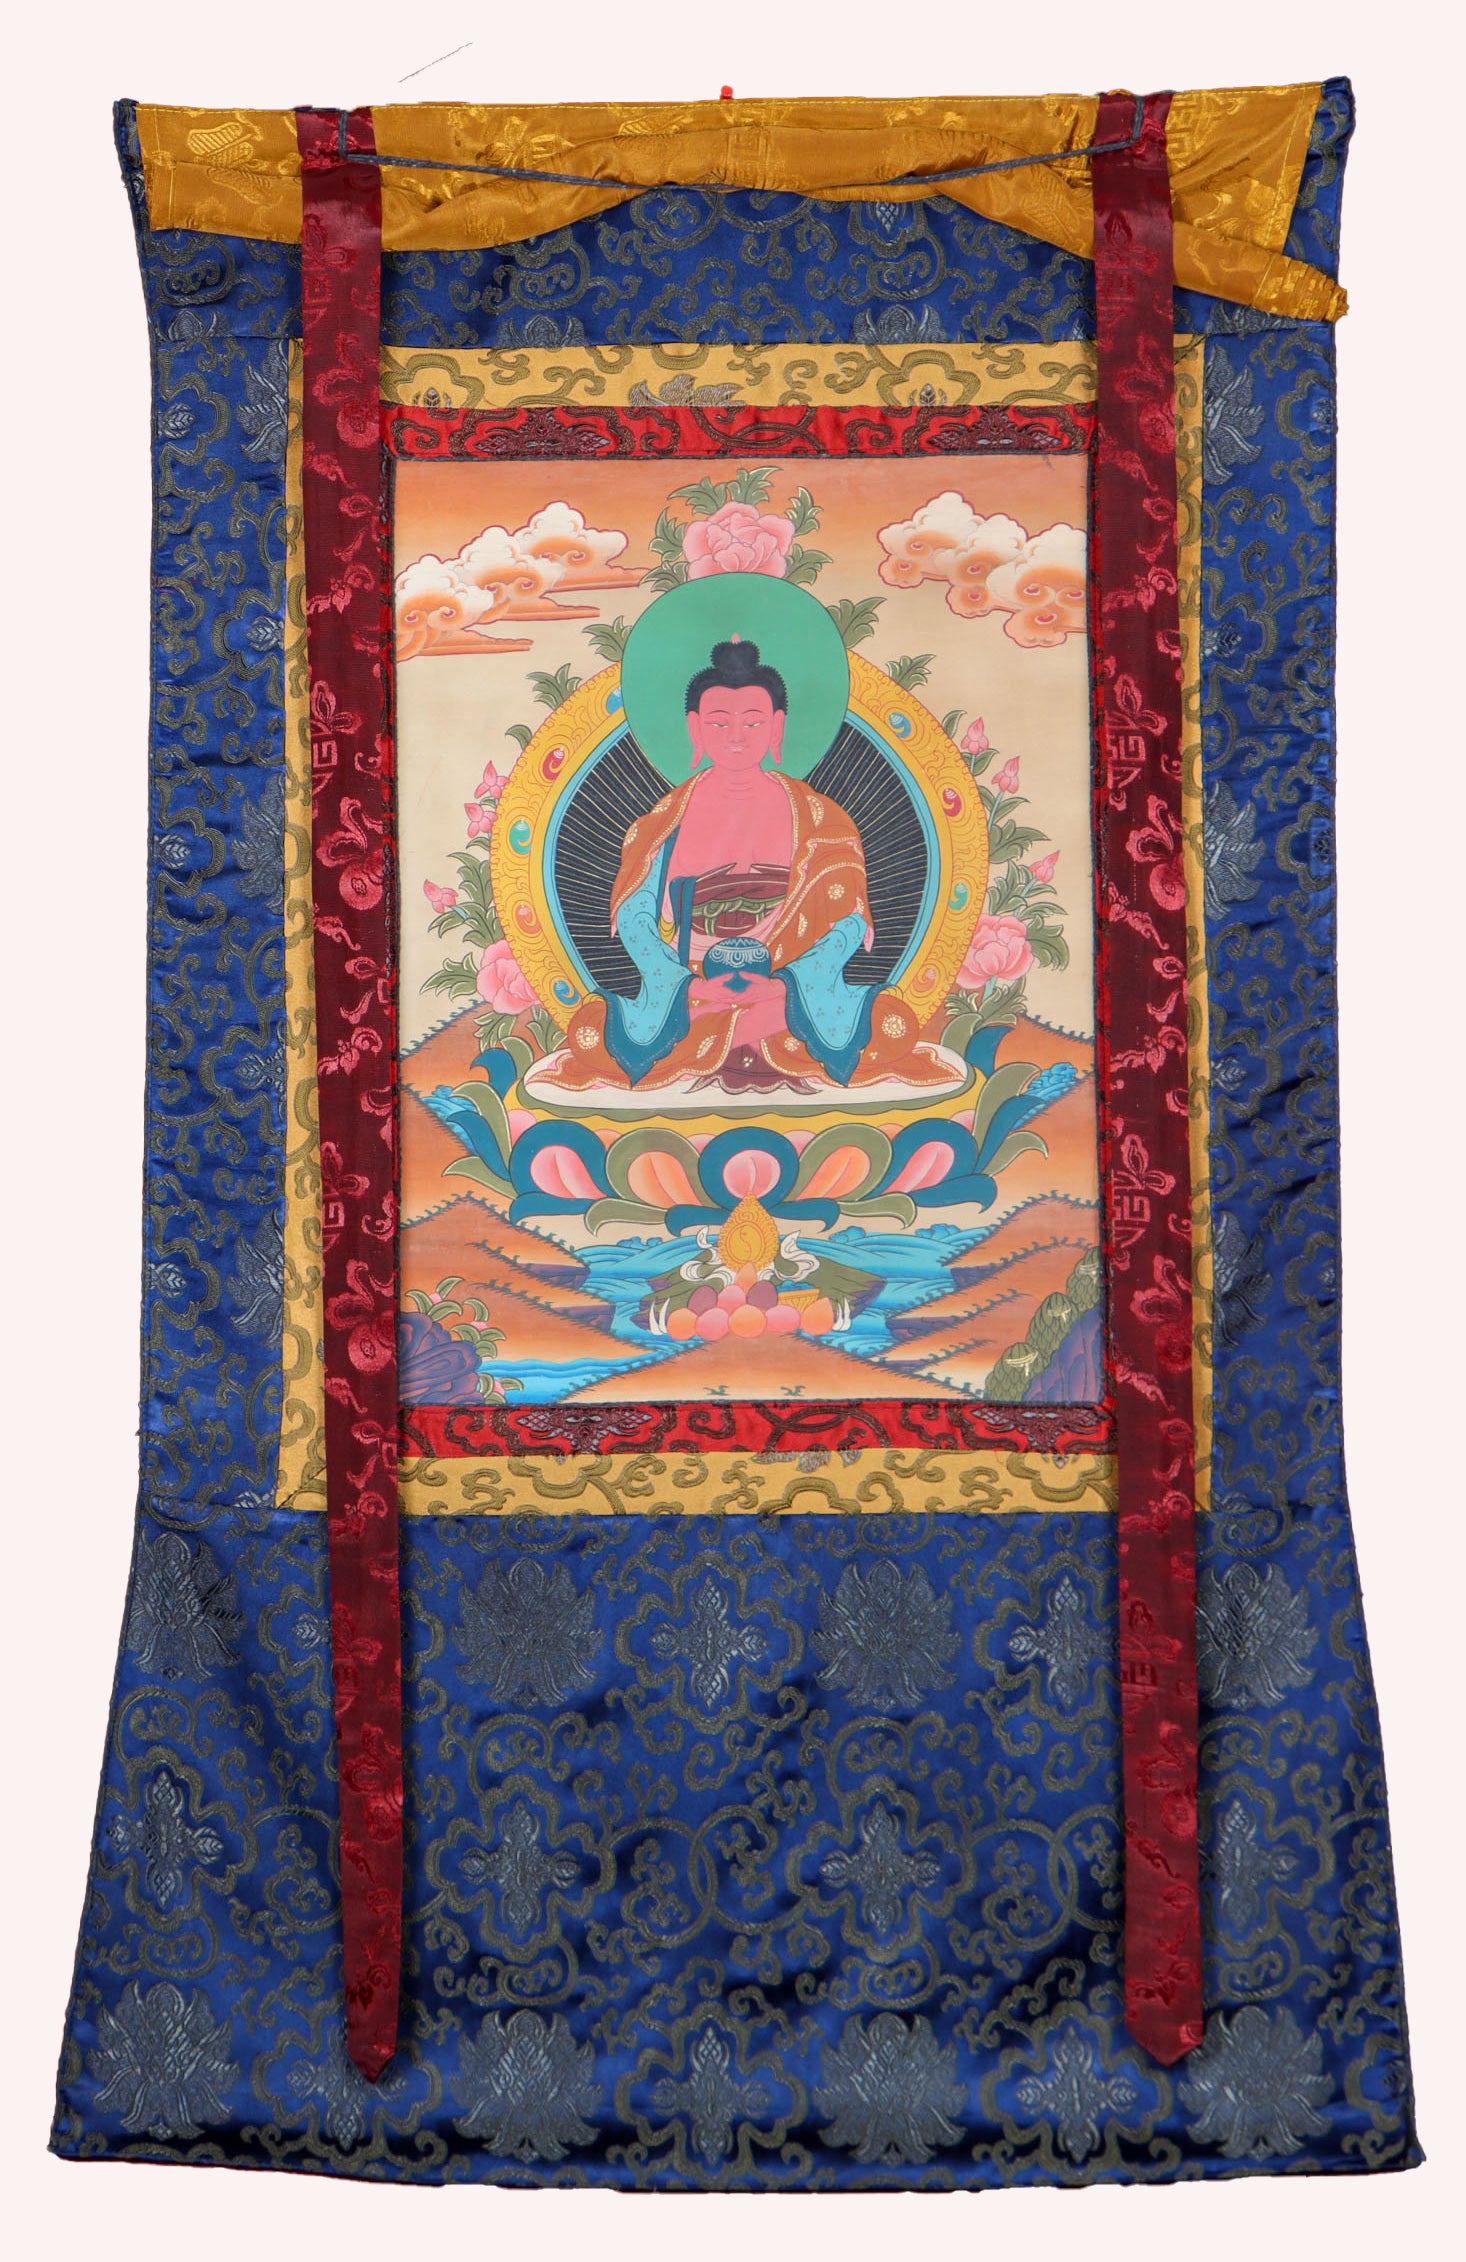 Amitabha Brocade Thangka Painting for rituals and ceremonies.